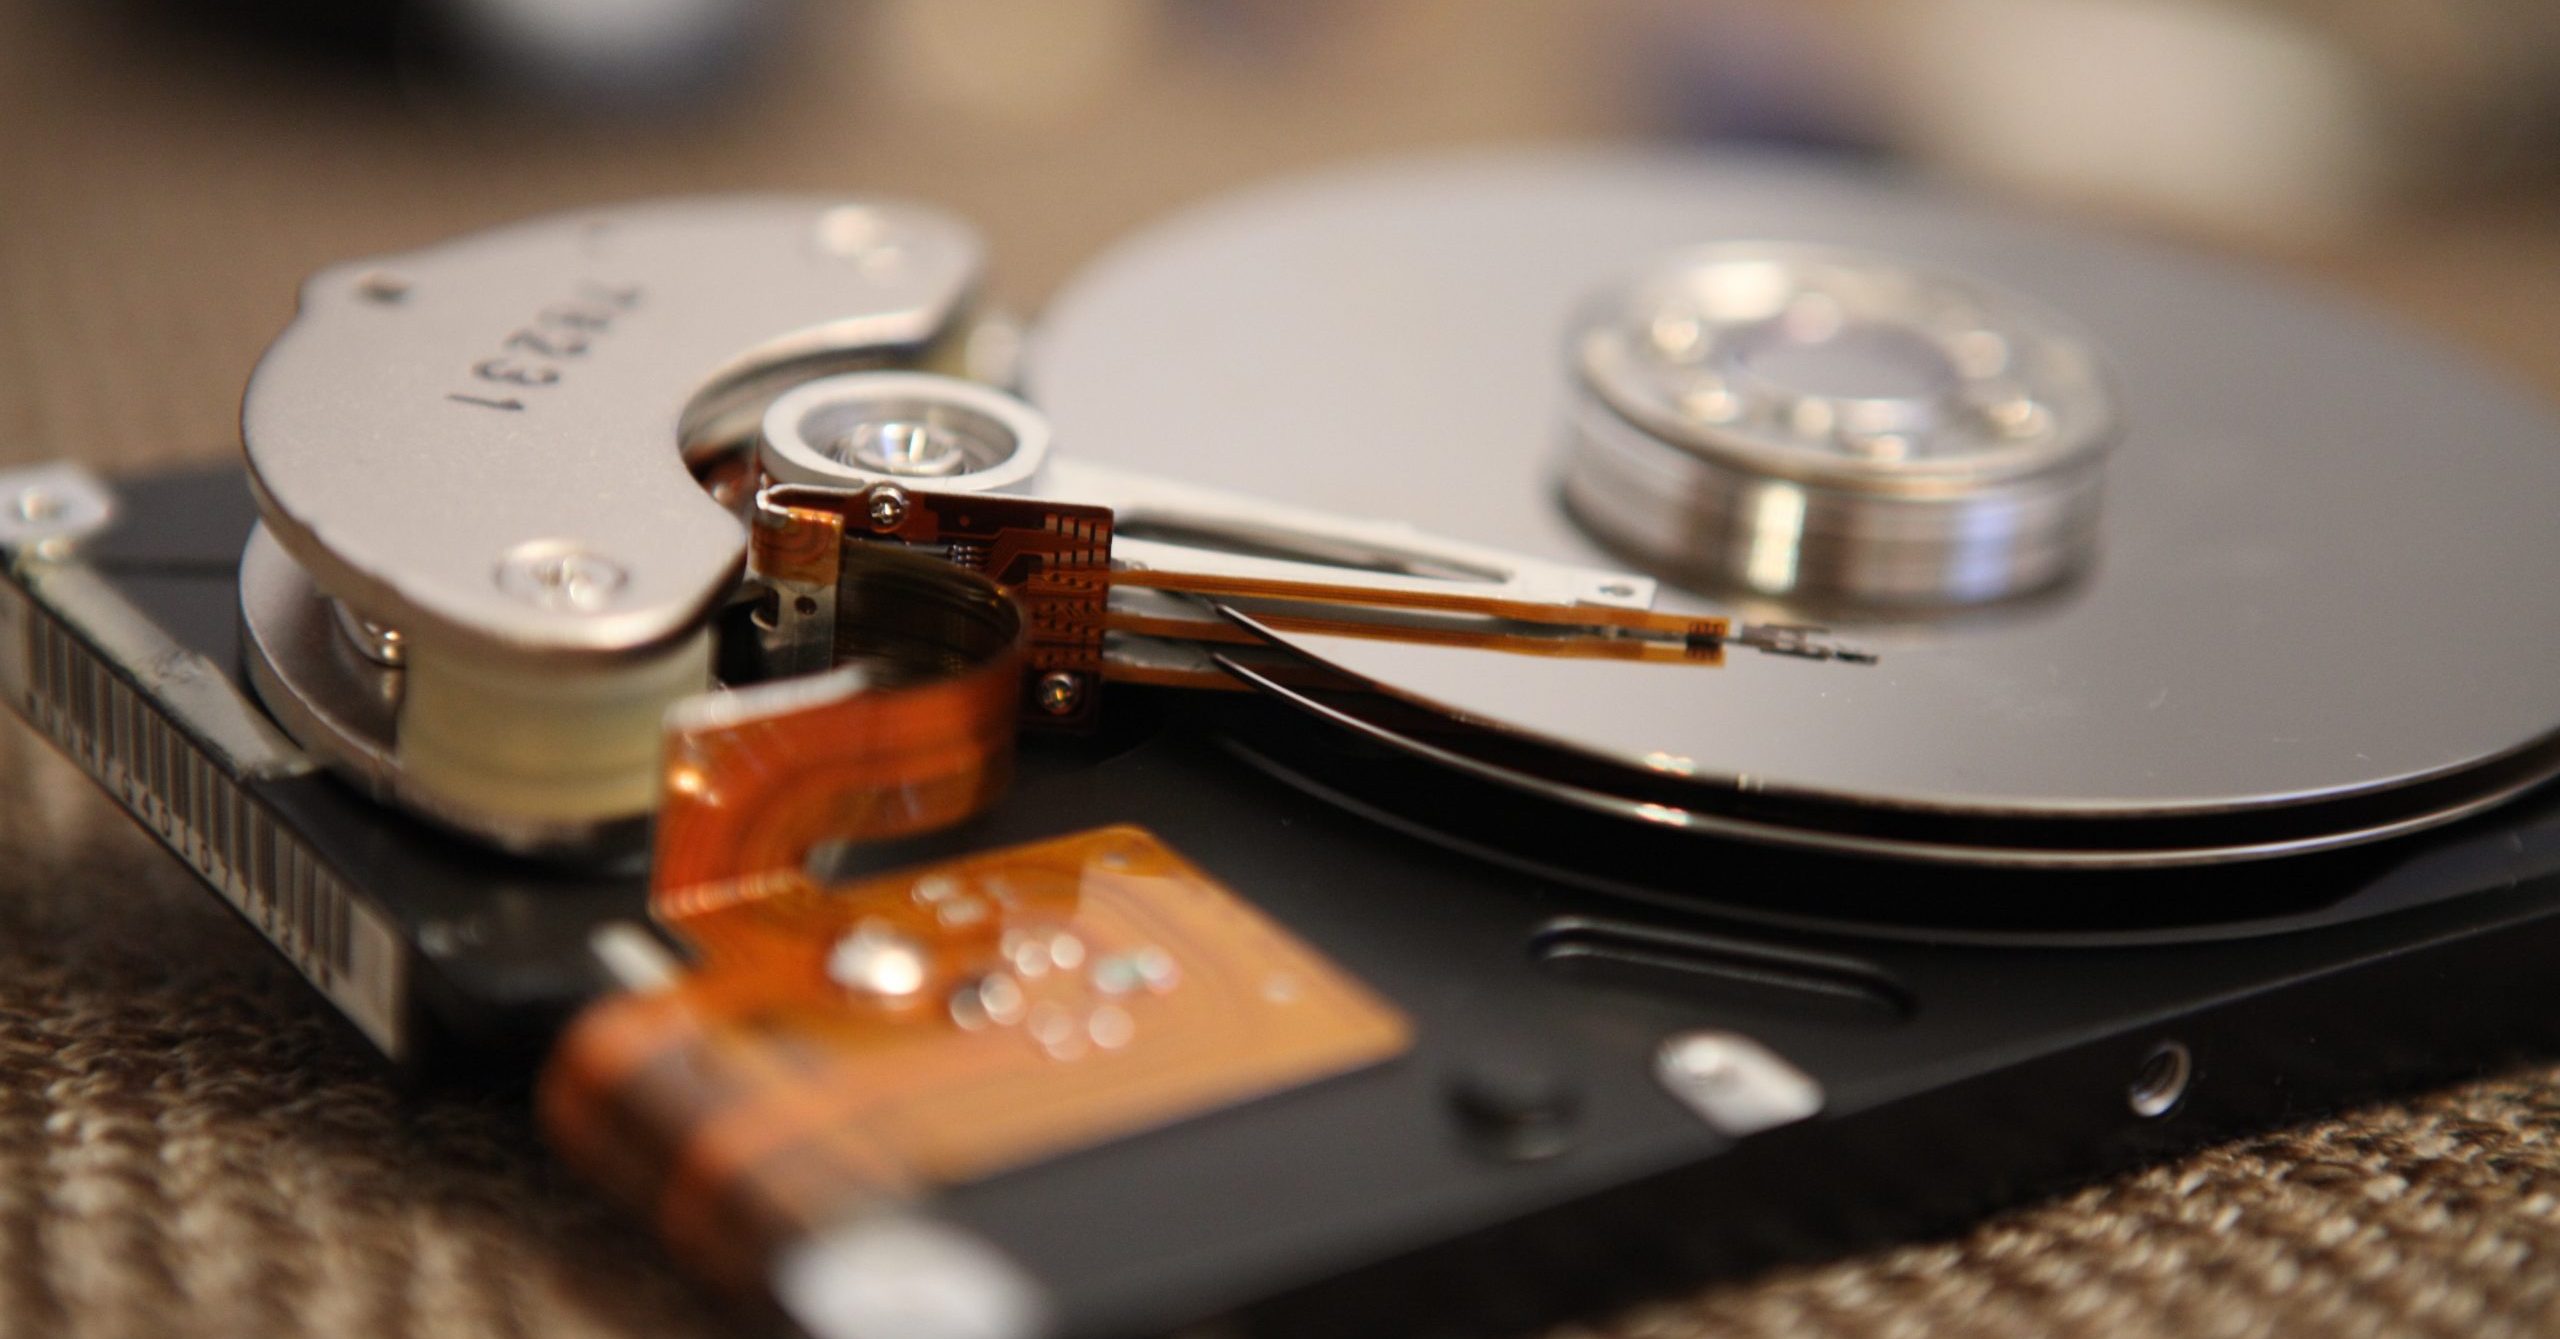 Press Release: DriveSavers Experiences Tremendous Increase in Encrypted Hard Drive Recoveries